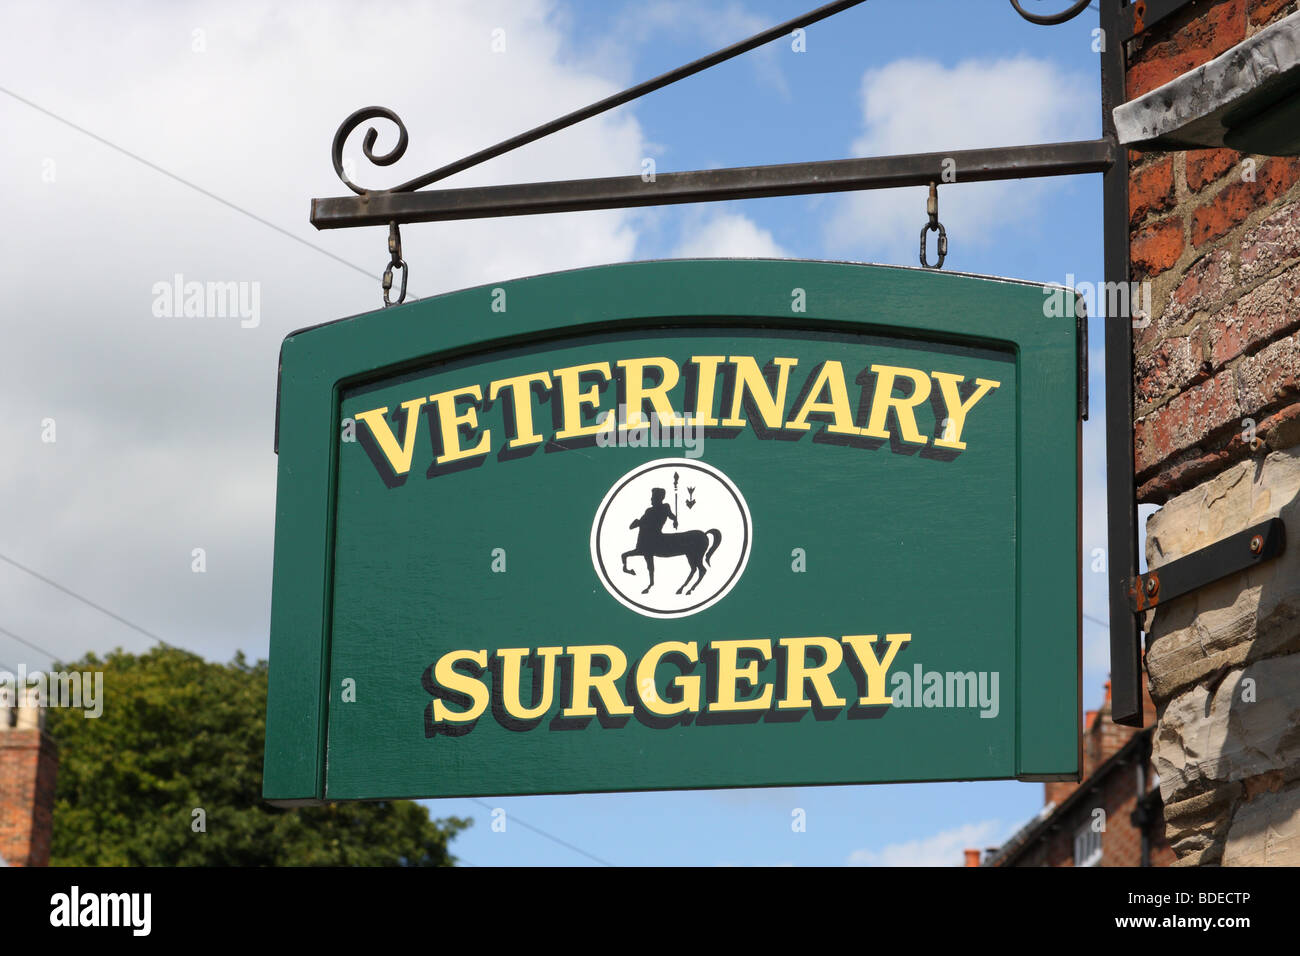 A sign at a veterinary surgery in the U.K. Stock Photo